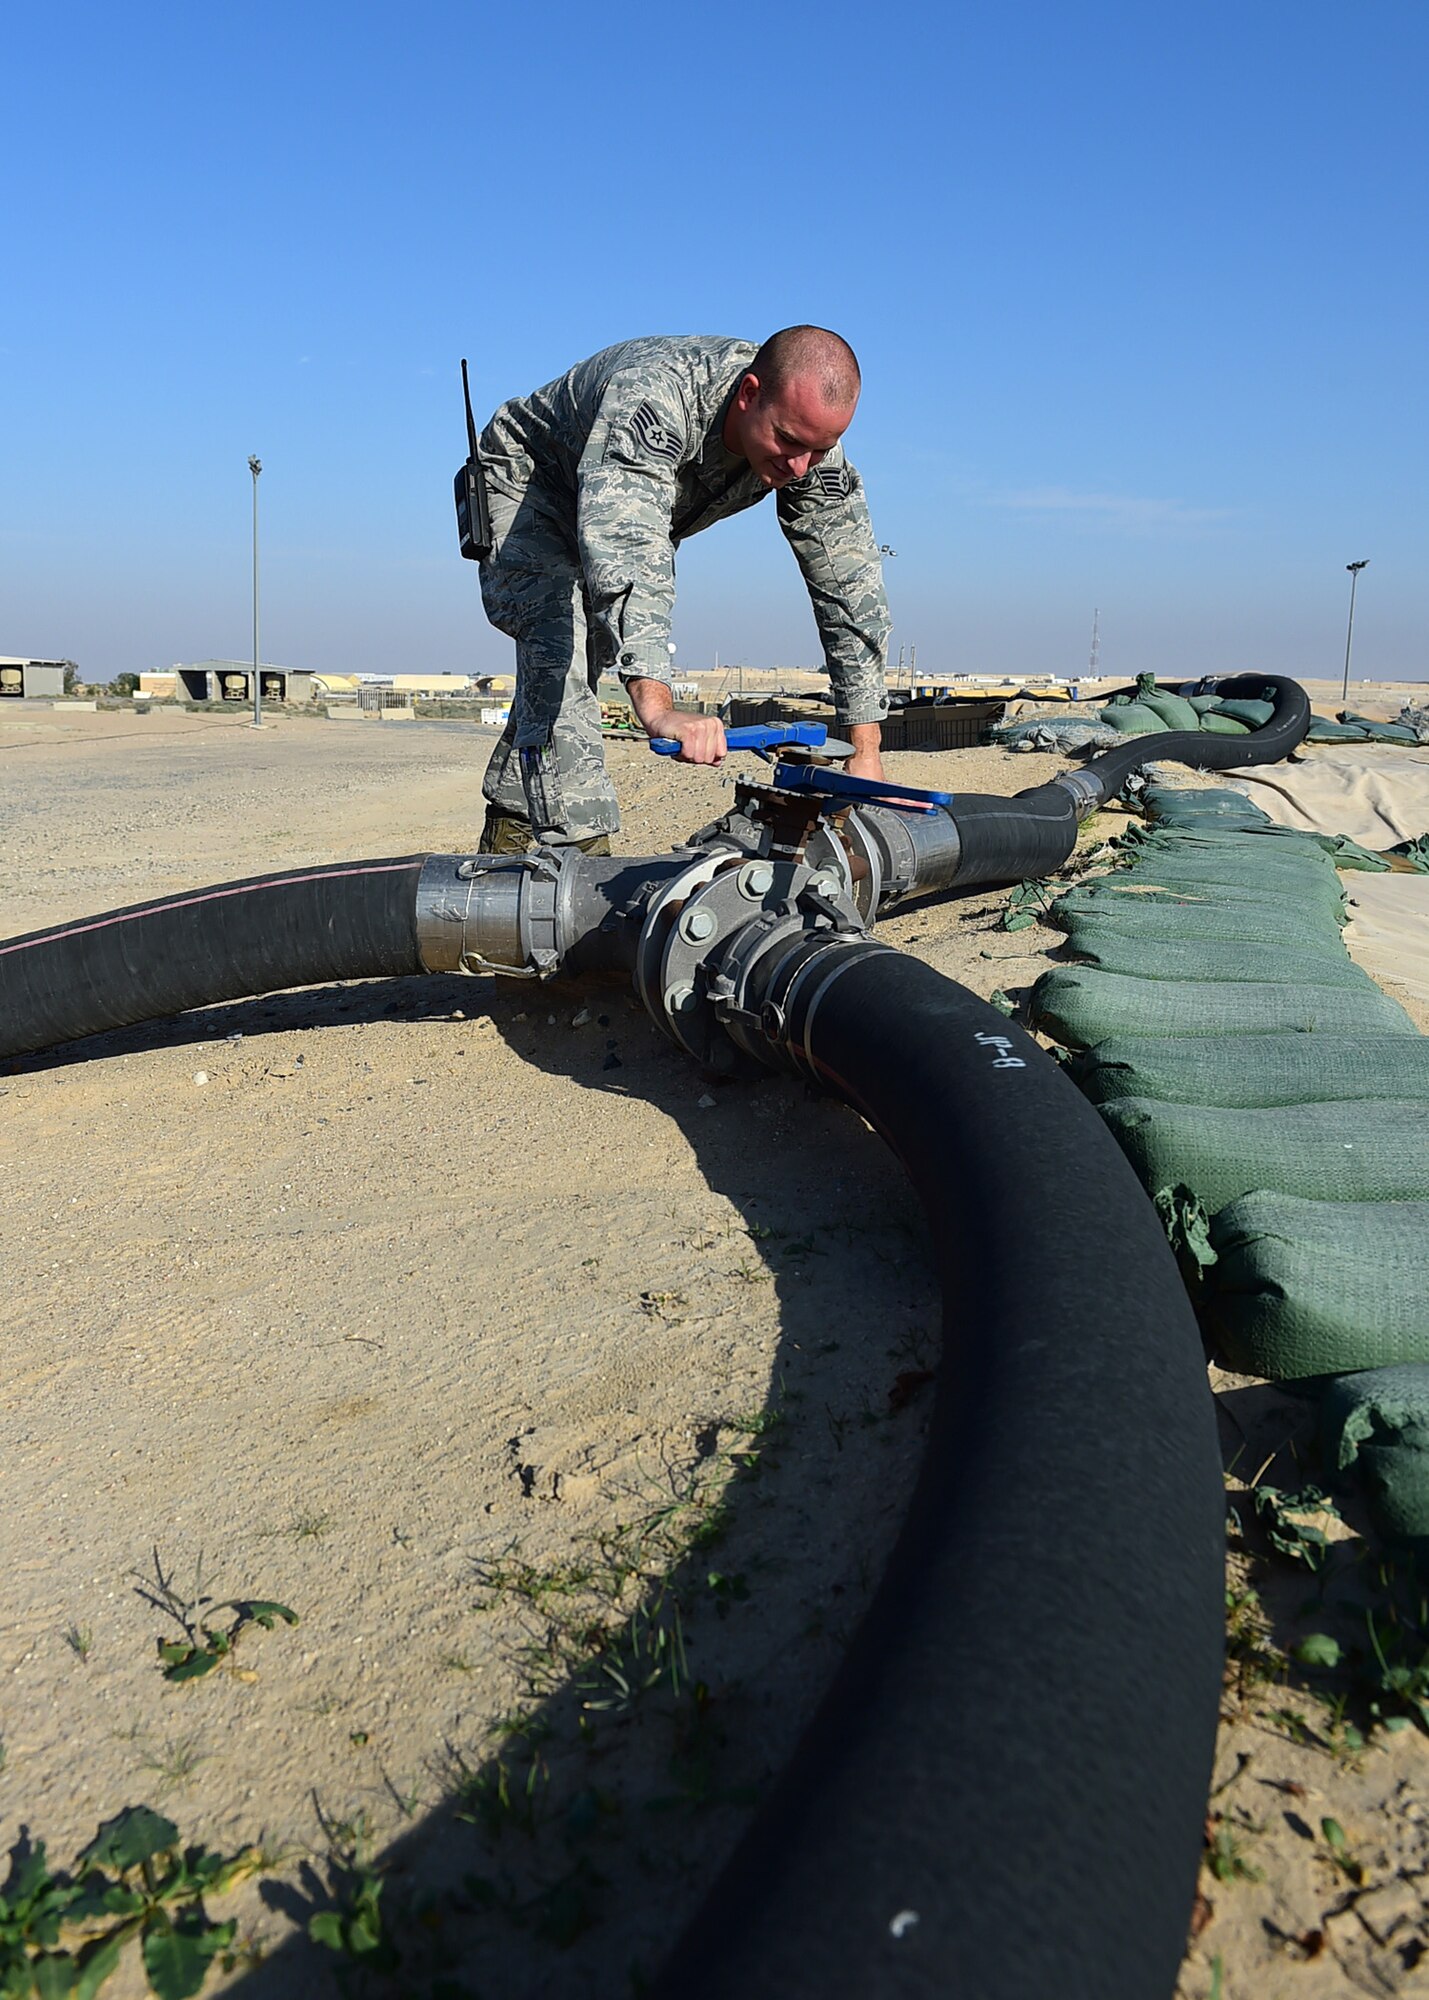 Staff Sgt. Russell Dupree, a 386th Expeditionary Logistics Readiness Squadron fuels systems craftsman, opens a fuel transfer valve at an undisclosed location in Southwest Asia, Dec. 1, 2015. The Petroleum, Oils and Lubricants flight is responsible for providing fuel to all aircraft, and ground equipment for U.S. and coalition forces on base in support of Operation INHERENT RESOLVE. (U.S. Air Force photo by Staff Sgt. Jerilyn Quintanilla)